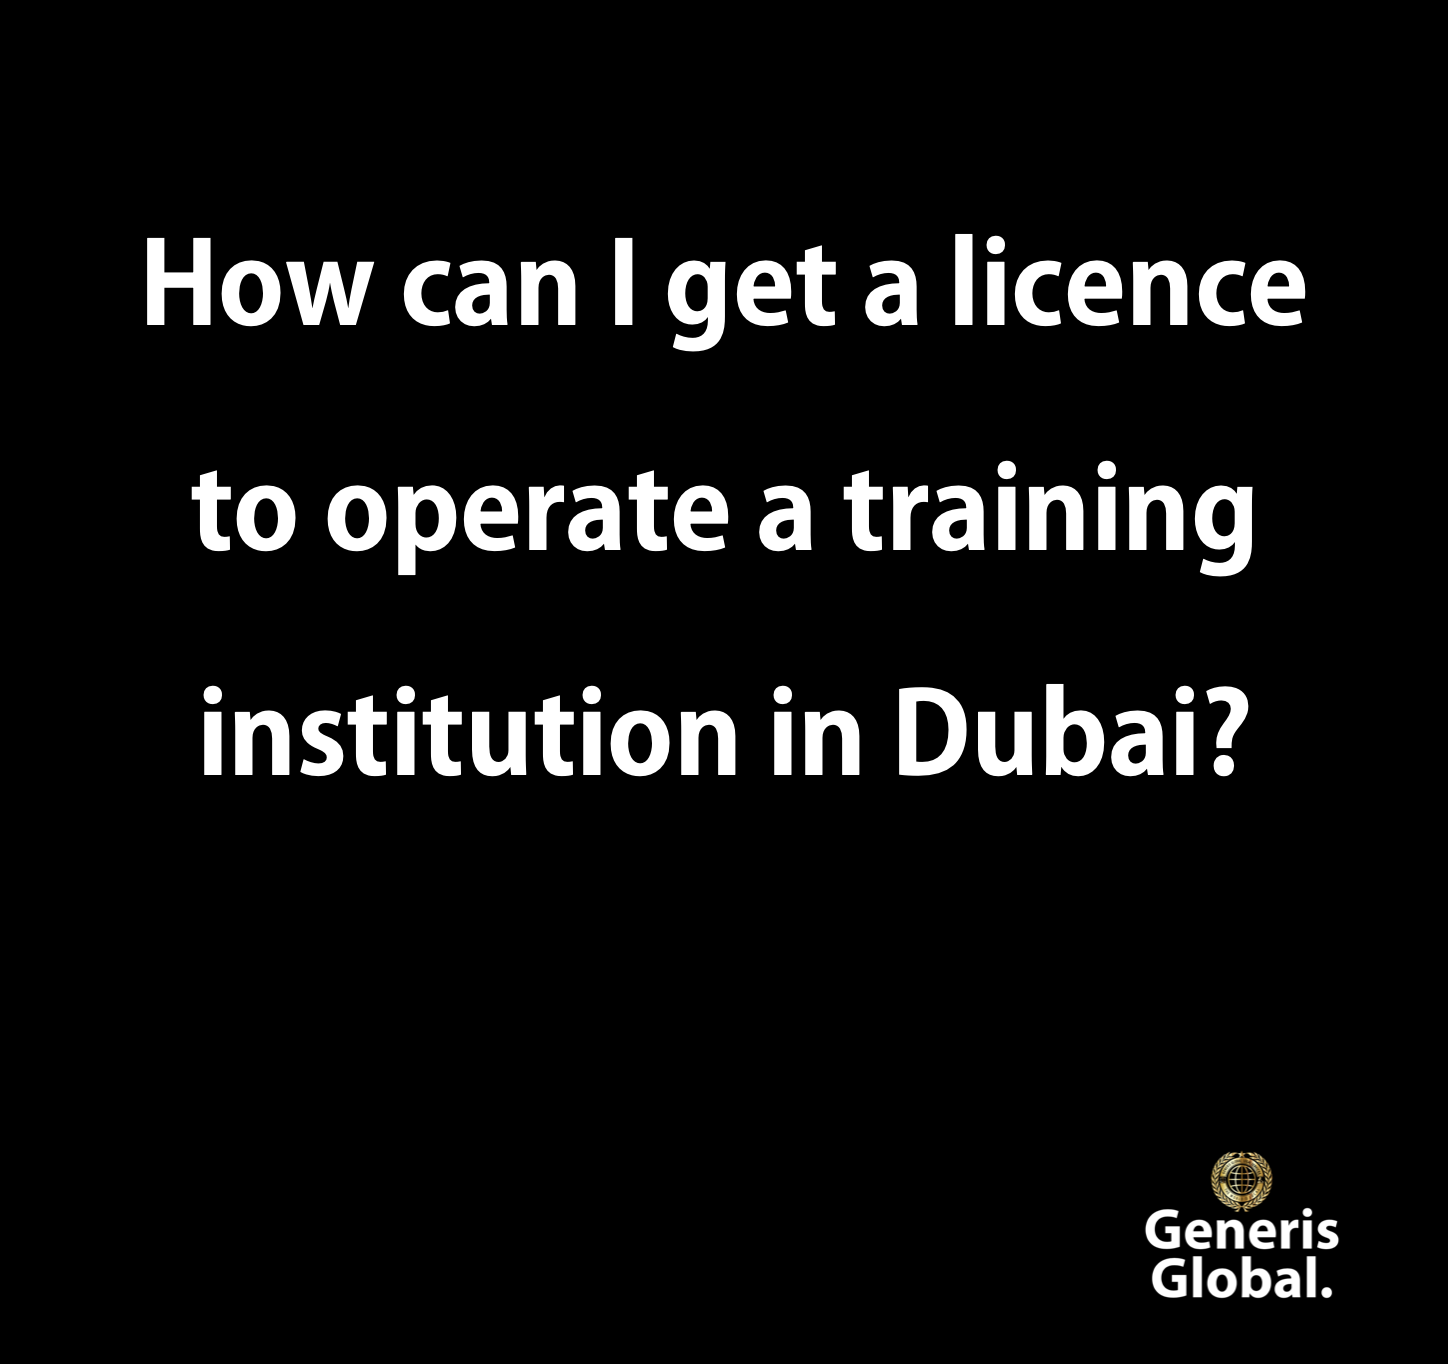 licence to operate a training institution in Dubai